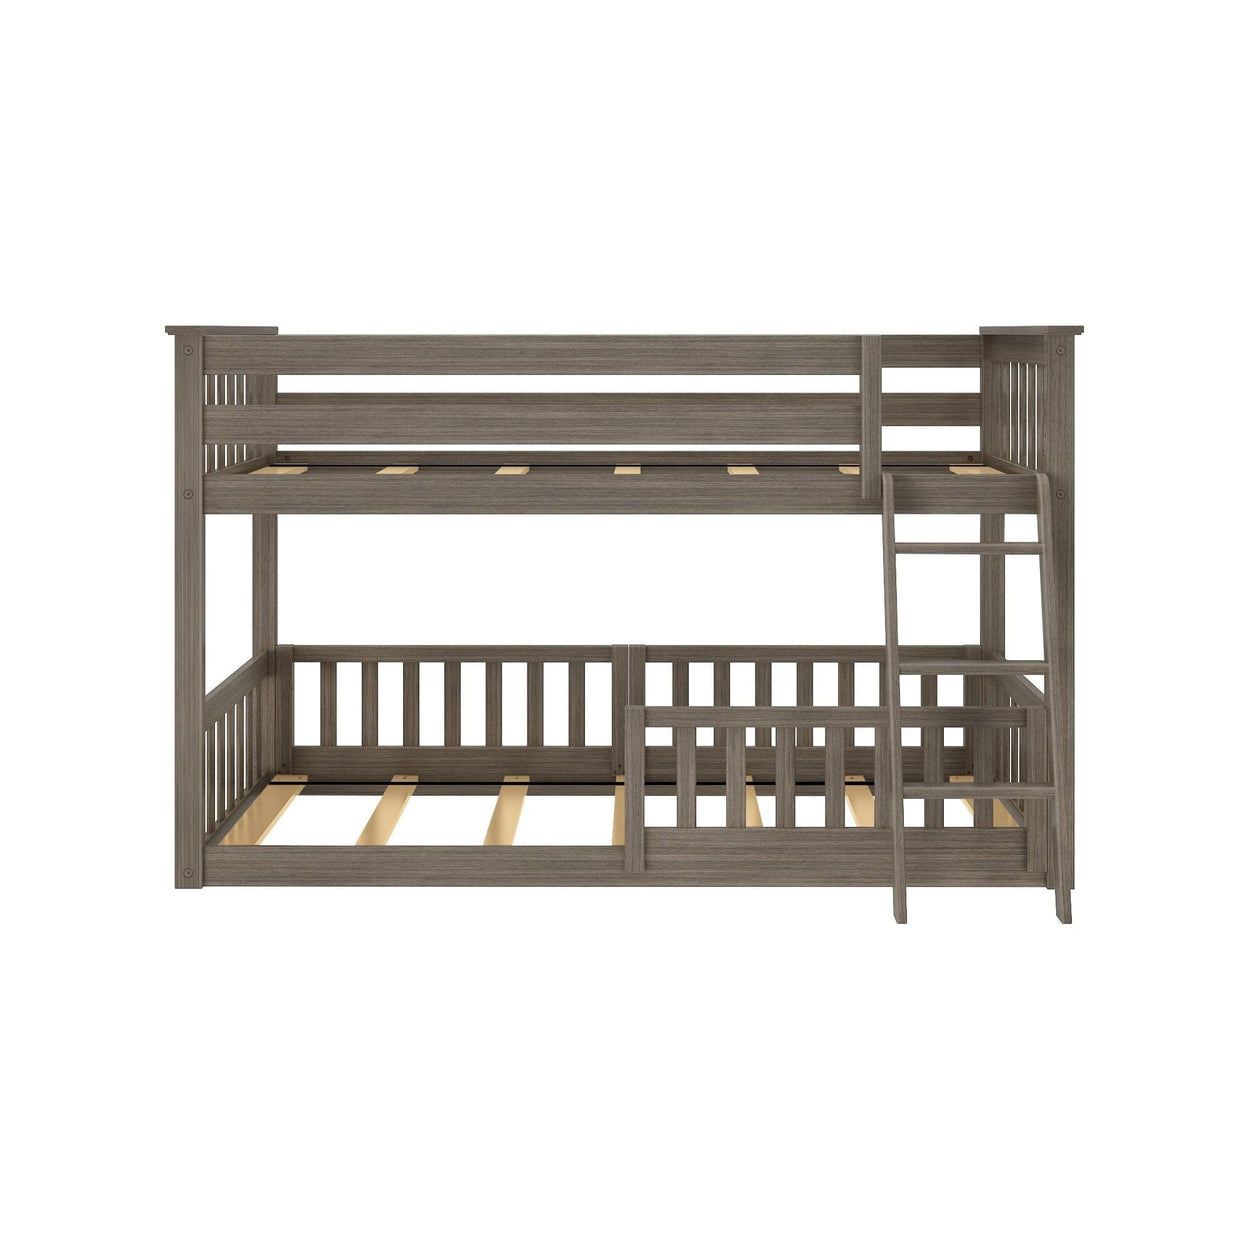 180214151309 : Bunk Beds Twin over Twin Low Bunk with Three Guard Rails, Clay